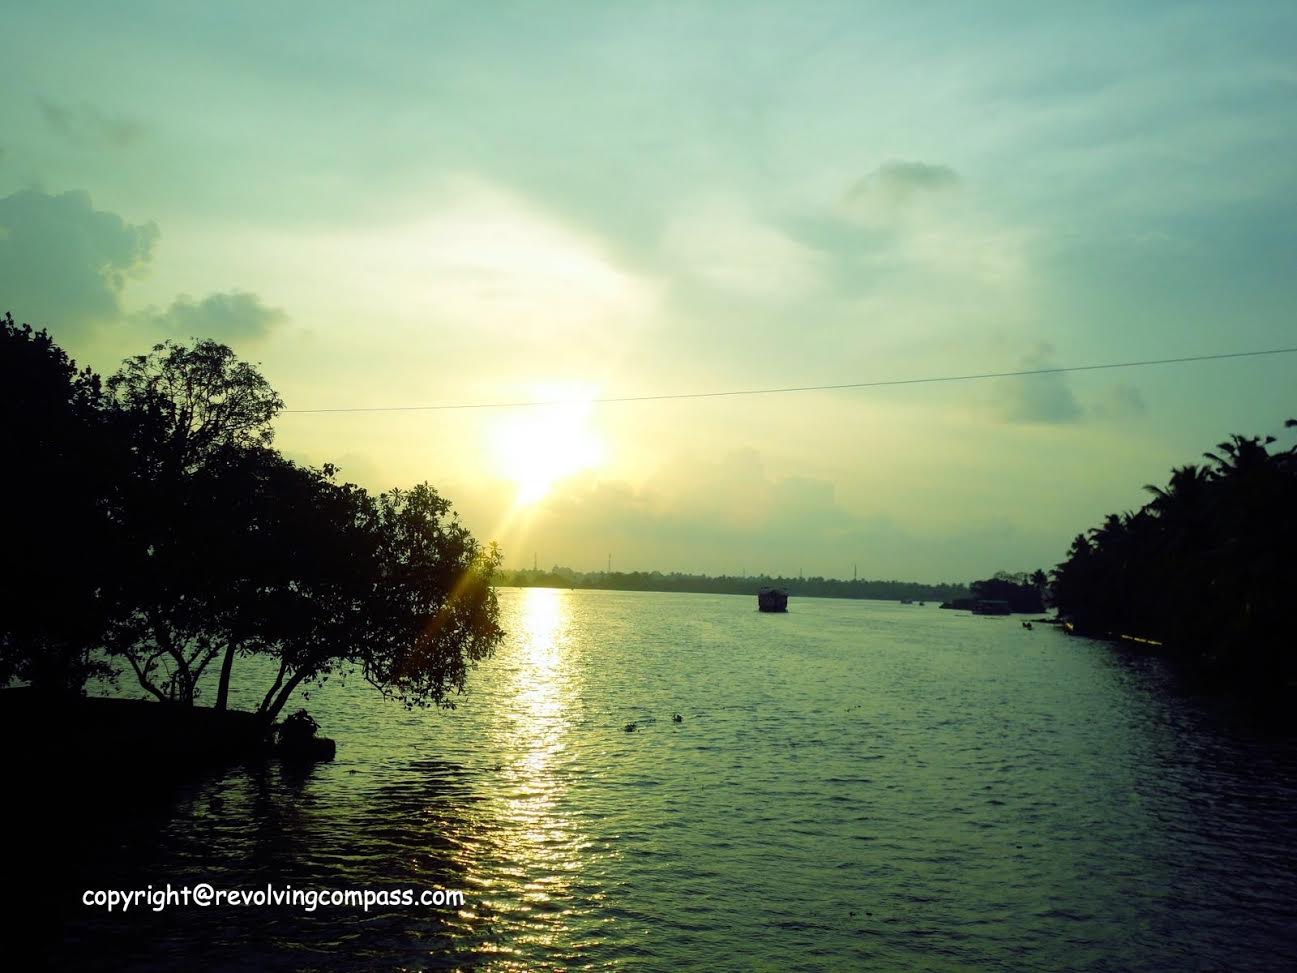 Alleppey - Kerala, India - The best places to see in Kerala - A complete travel guide to Kerala